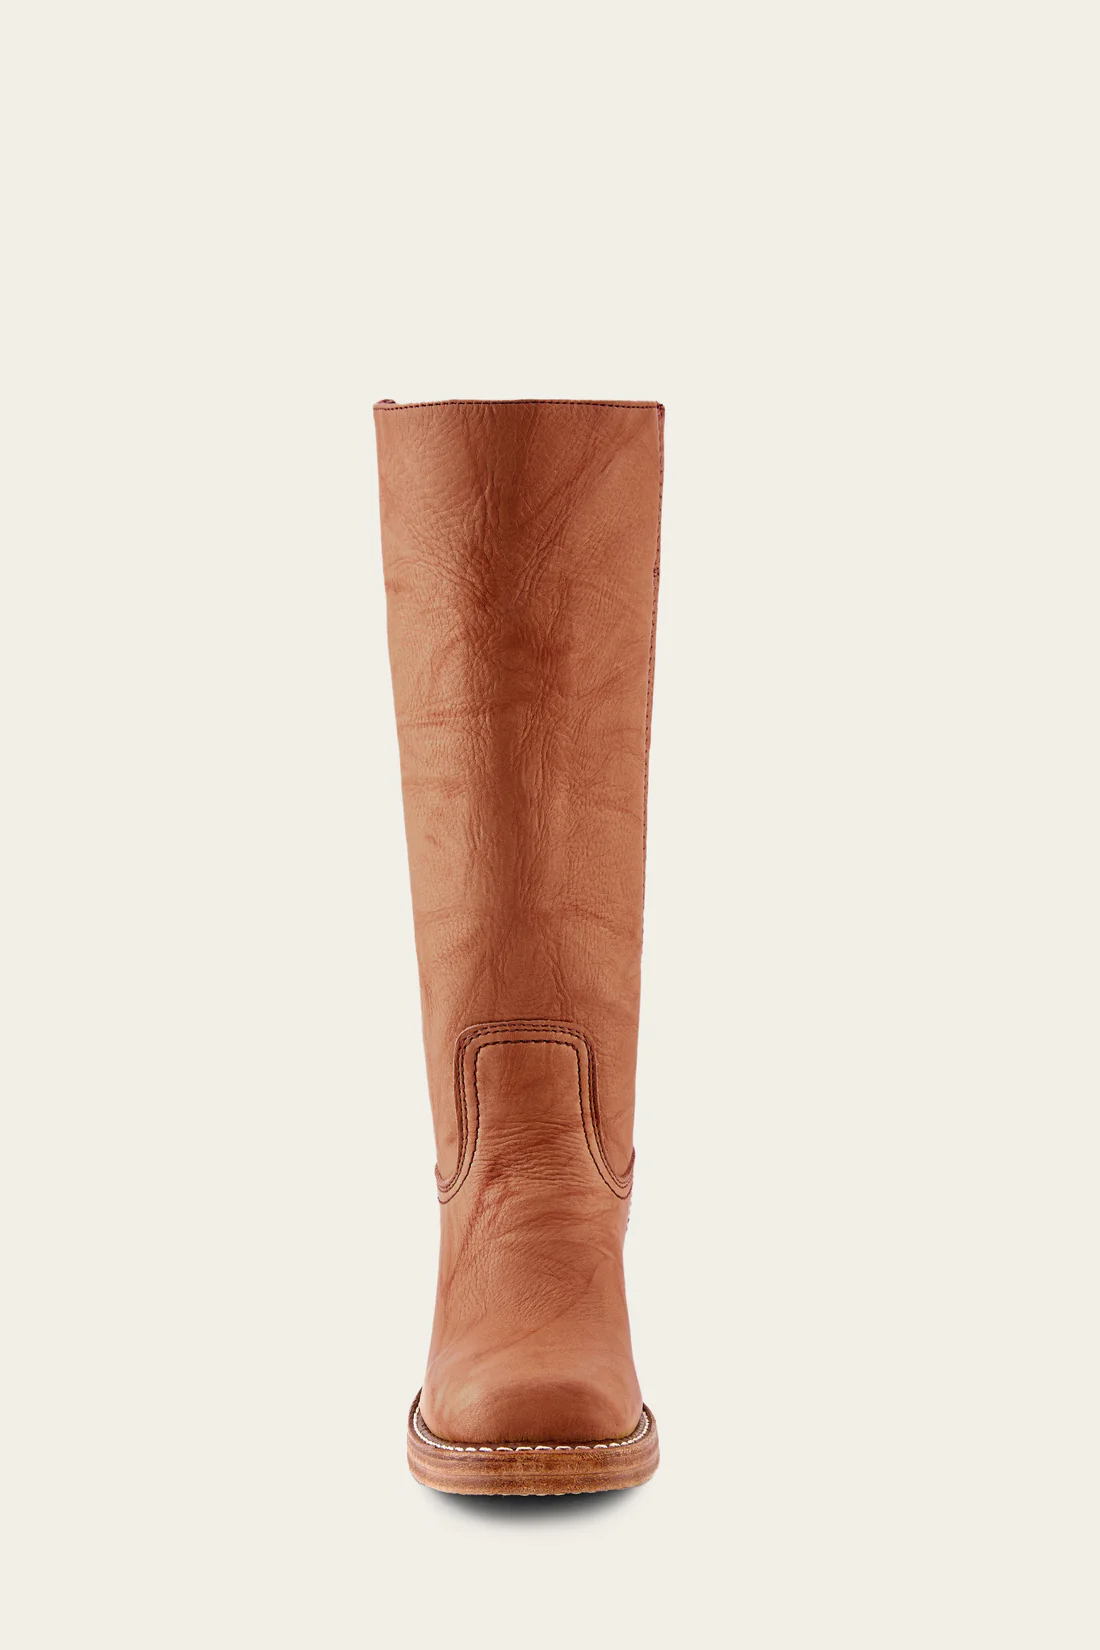 Frye Campus Leather Boot - Saddle front